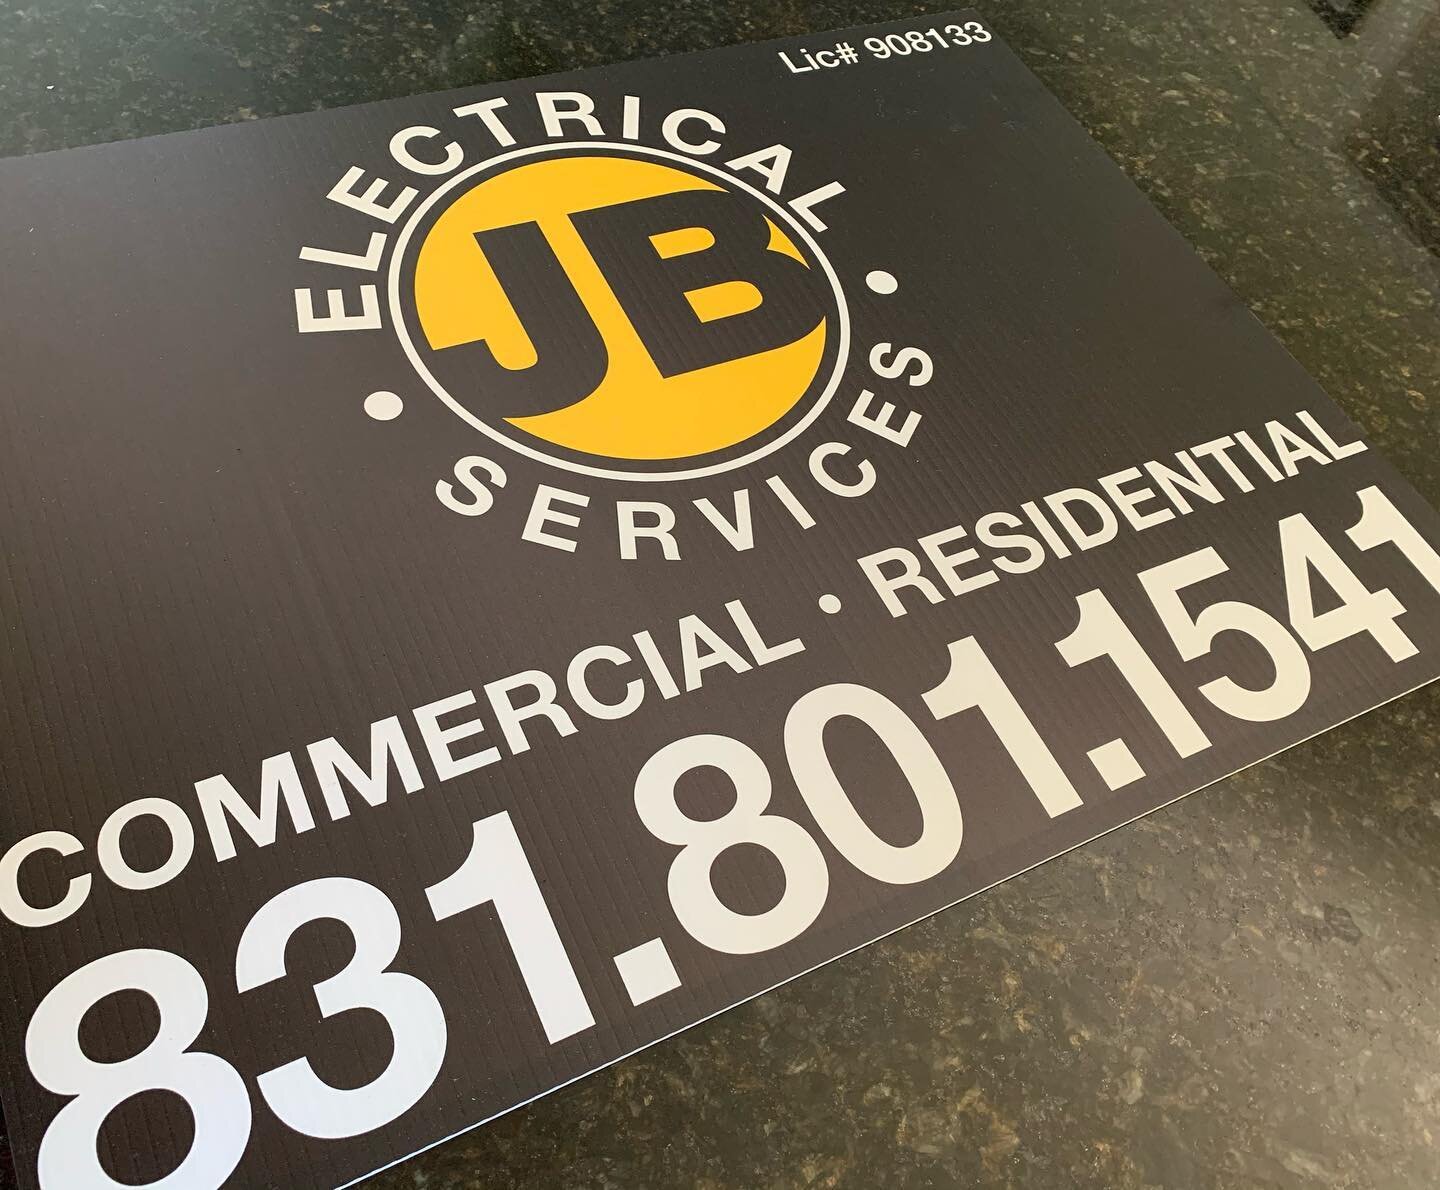 Coroplast yard sign and labels made for JB electrical @johnnyboke info@creativeGDS.com #coroplastyardsign #yardsigns #labels #stickers #graphicdesign #signanddesign